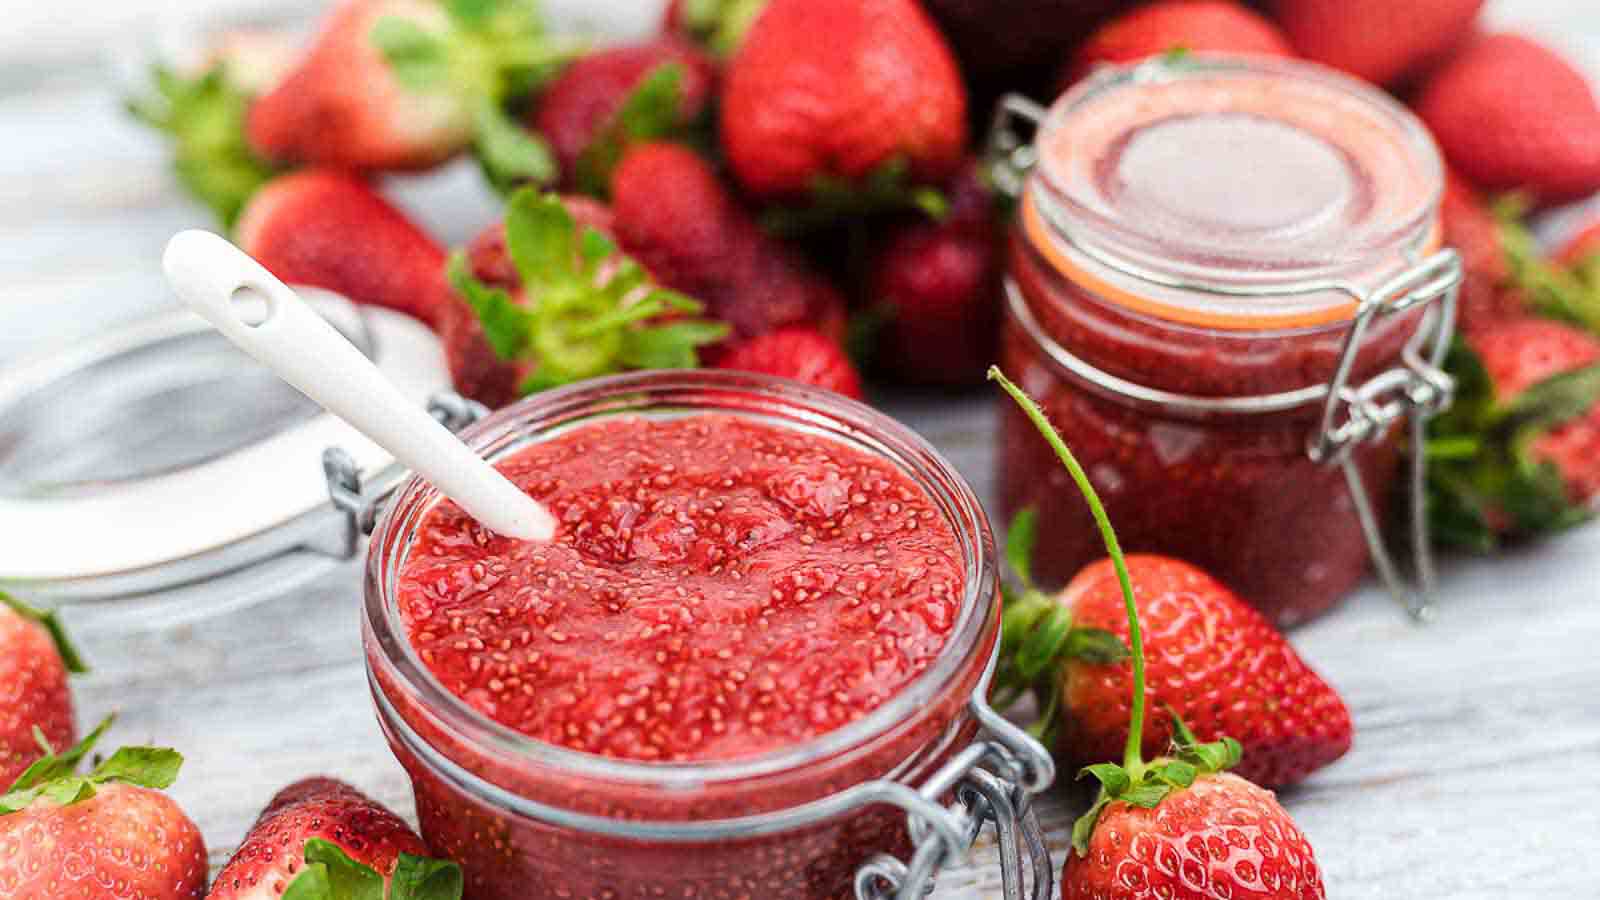 Strawberry jam in jars with a spoon.